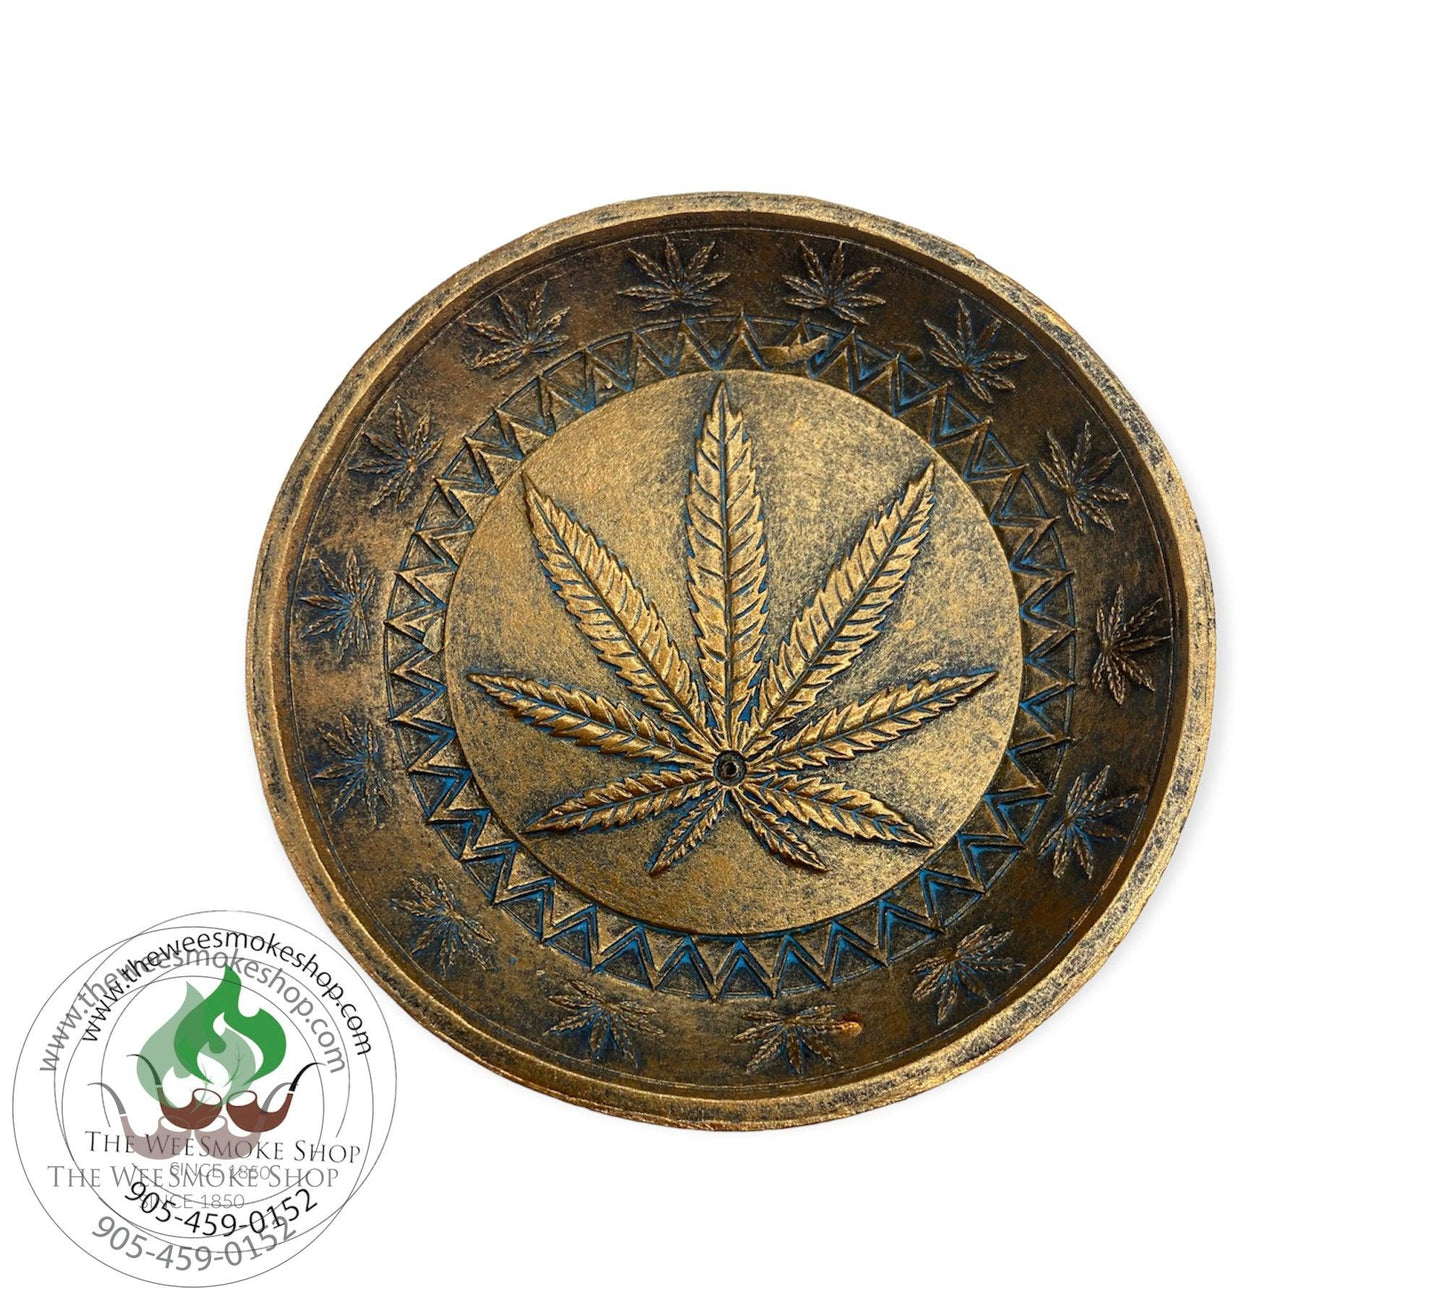 Ceramic Leaf Incense Ashtray-Incense Accessories-The Wee Smoke Shop